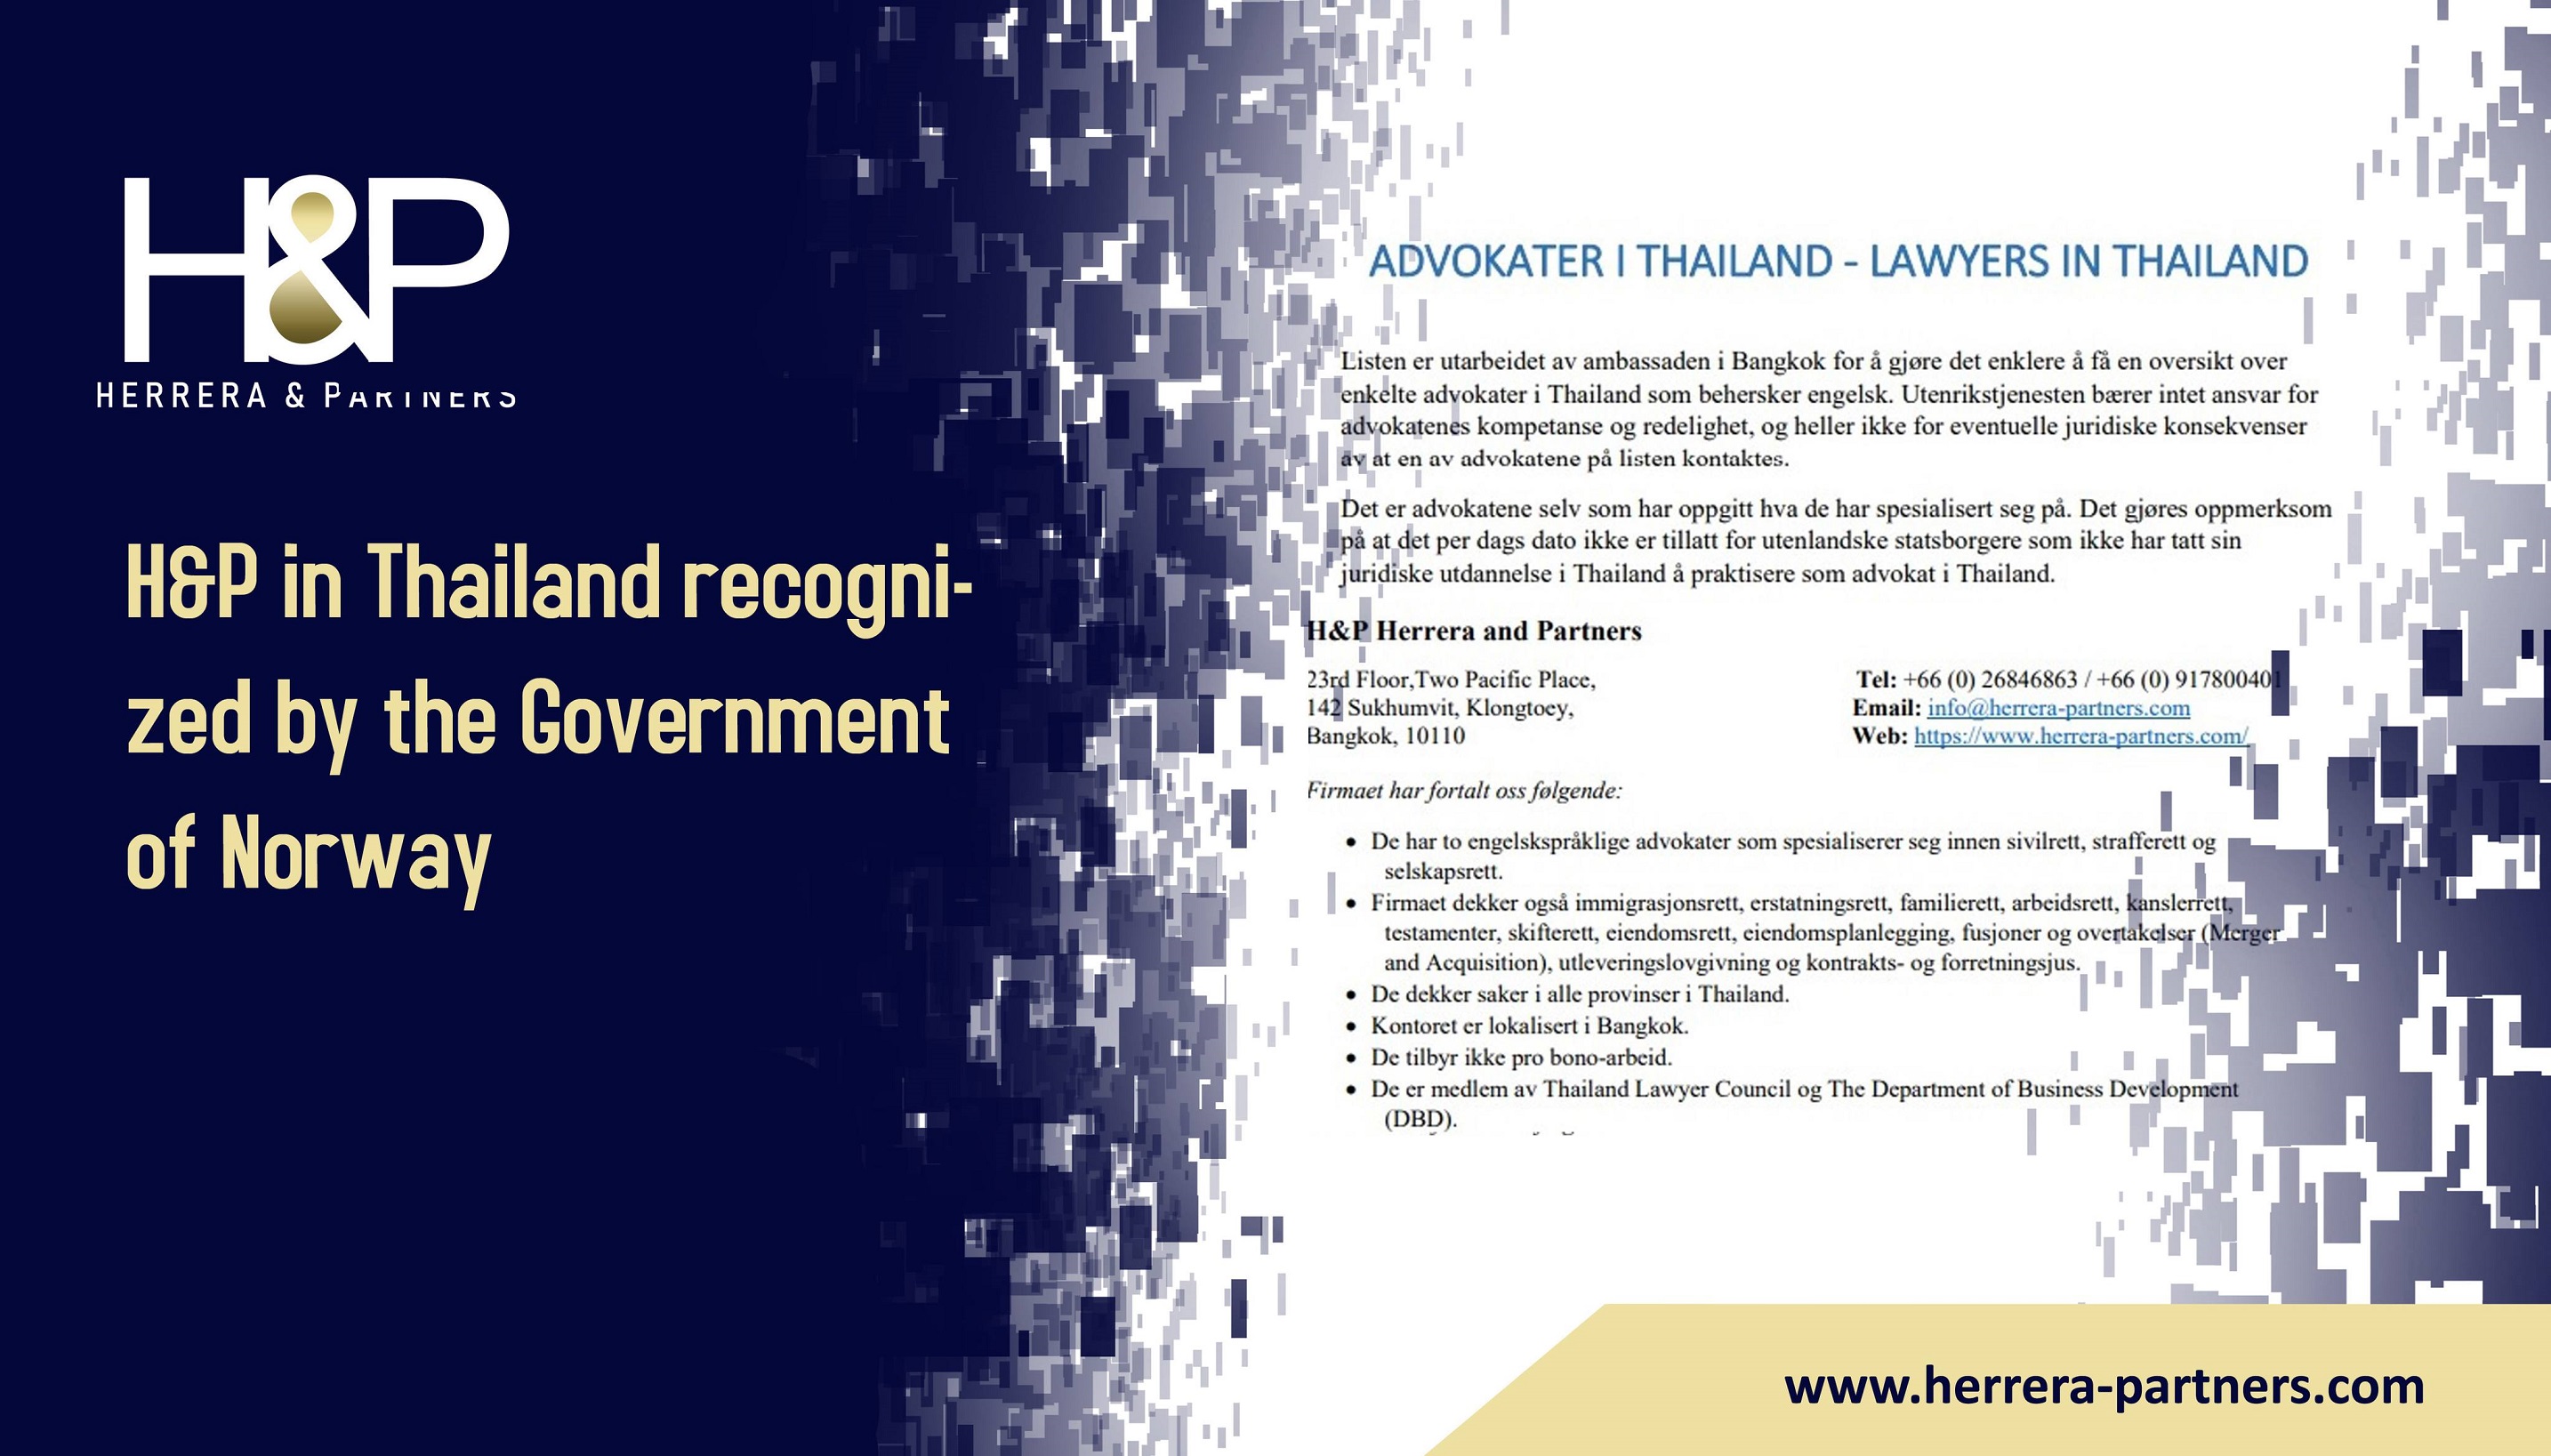 H&P in Thailand recognized by the Government of Norway International law firm in Bangkok